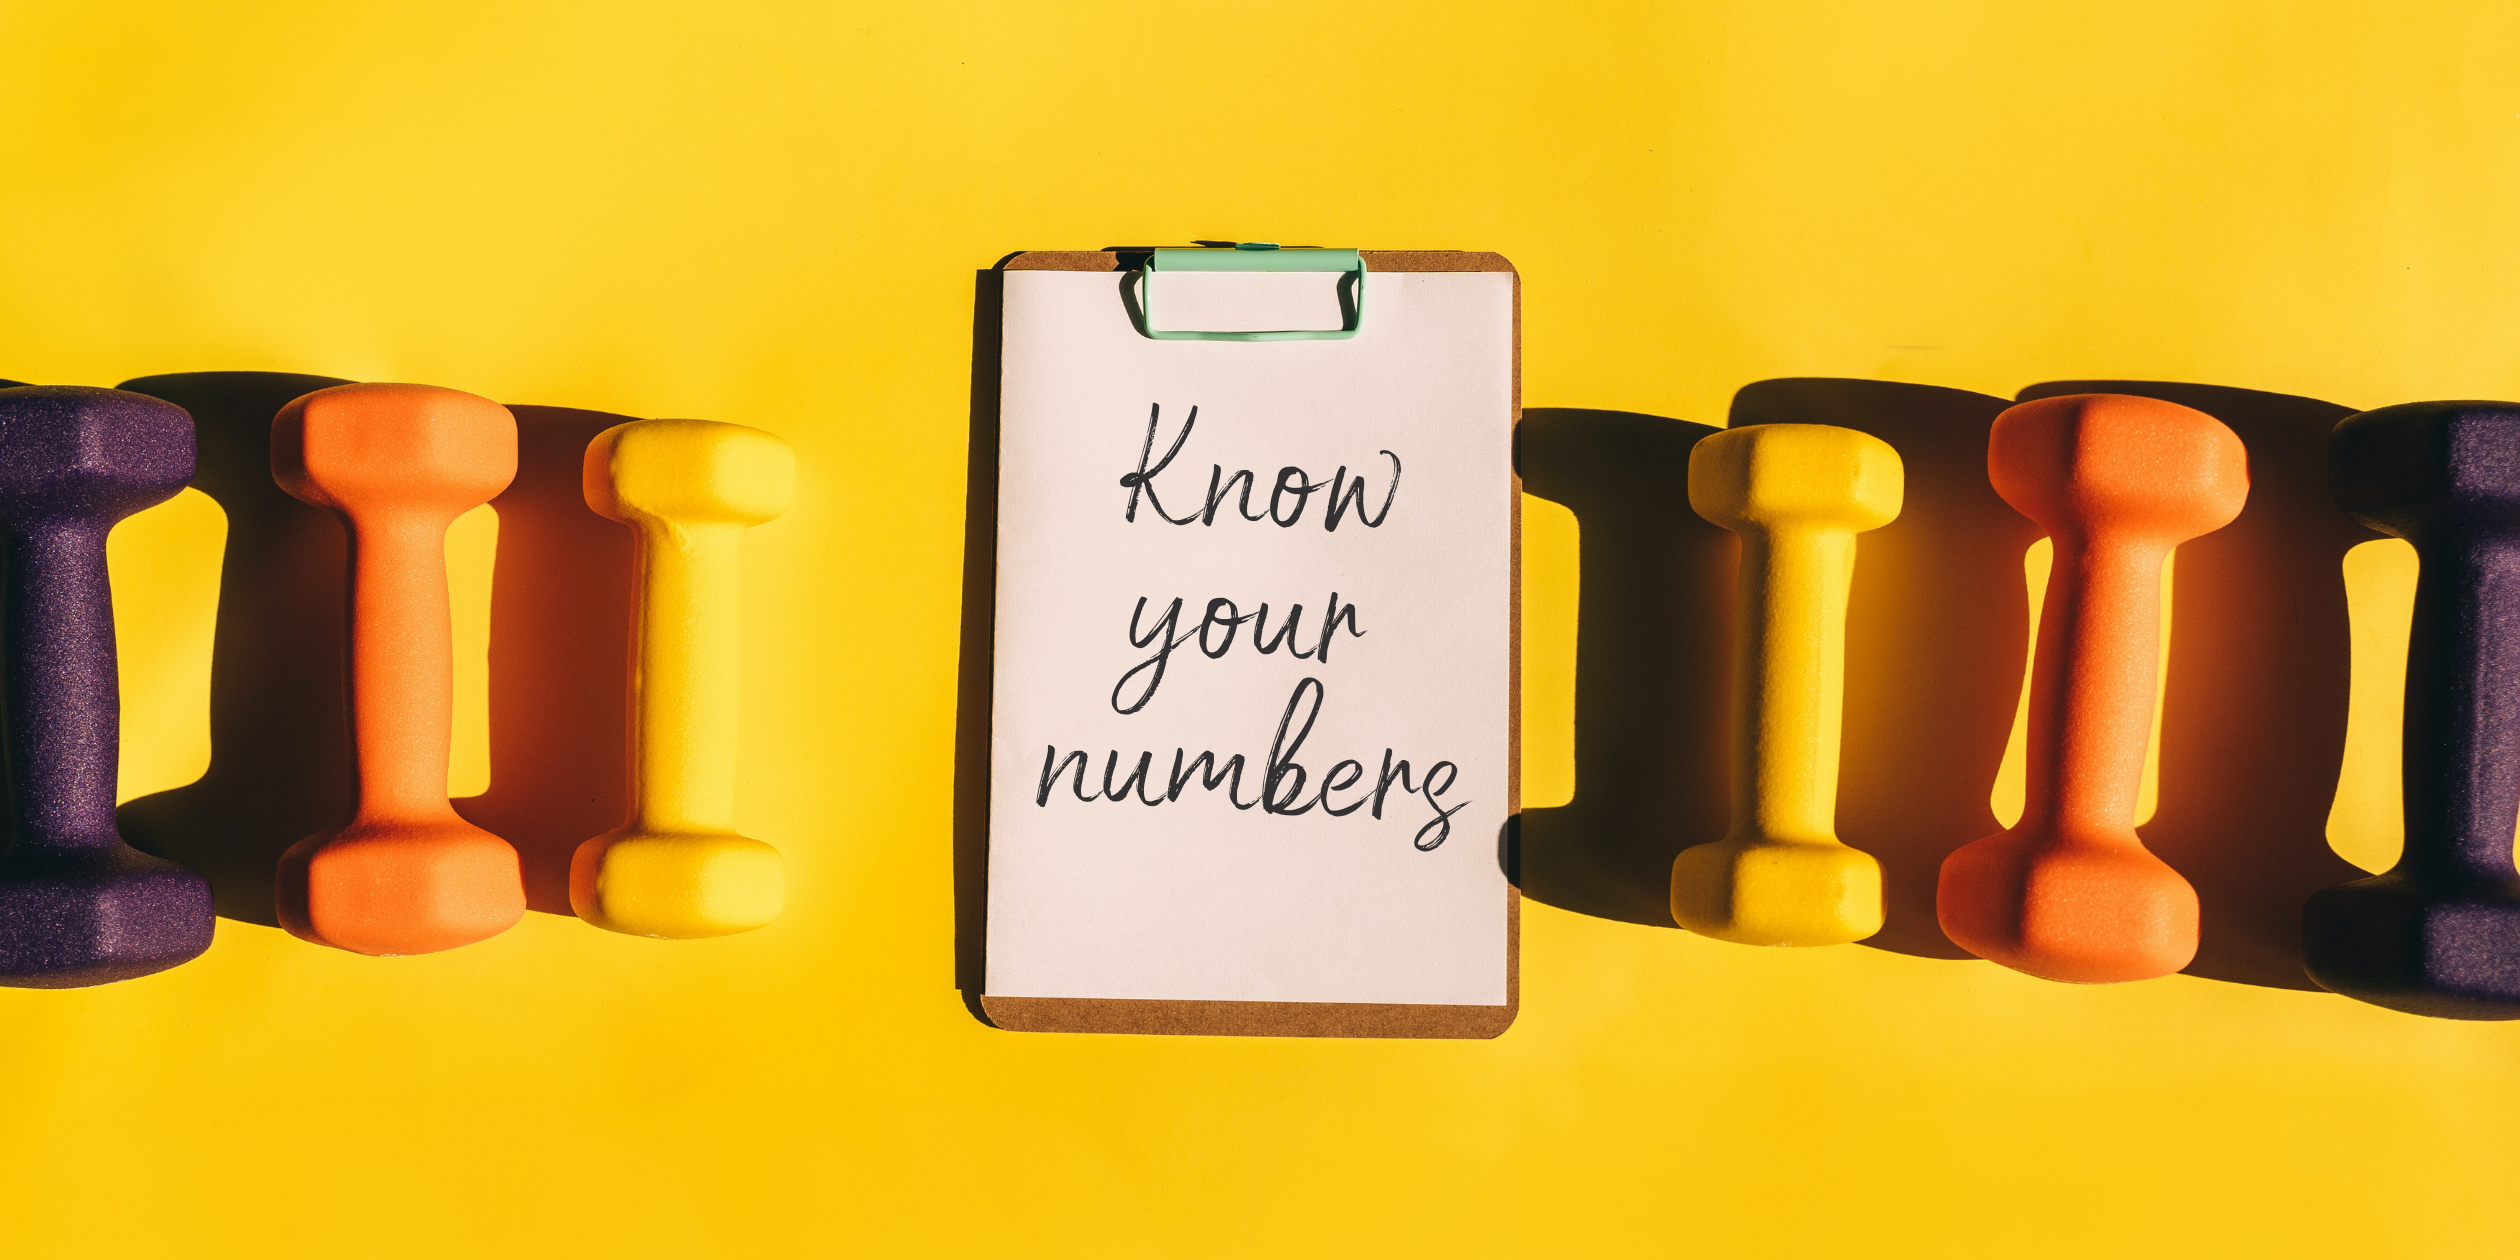 Know your numbers (1200 × 250px) (840 × 420px) (1).png